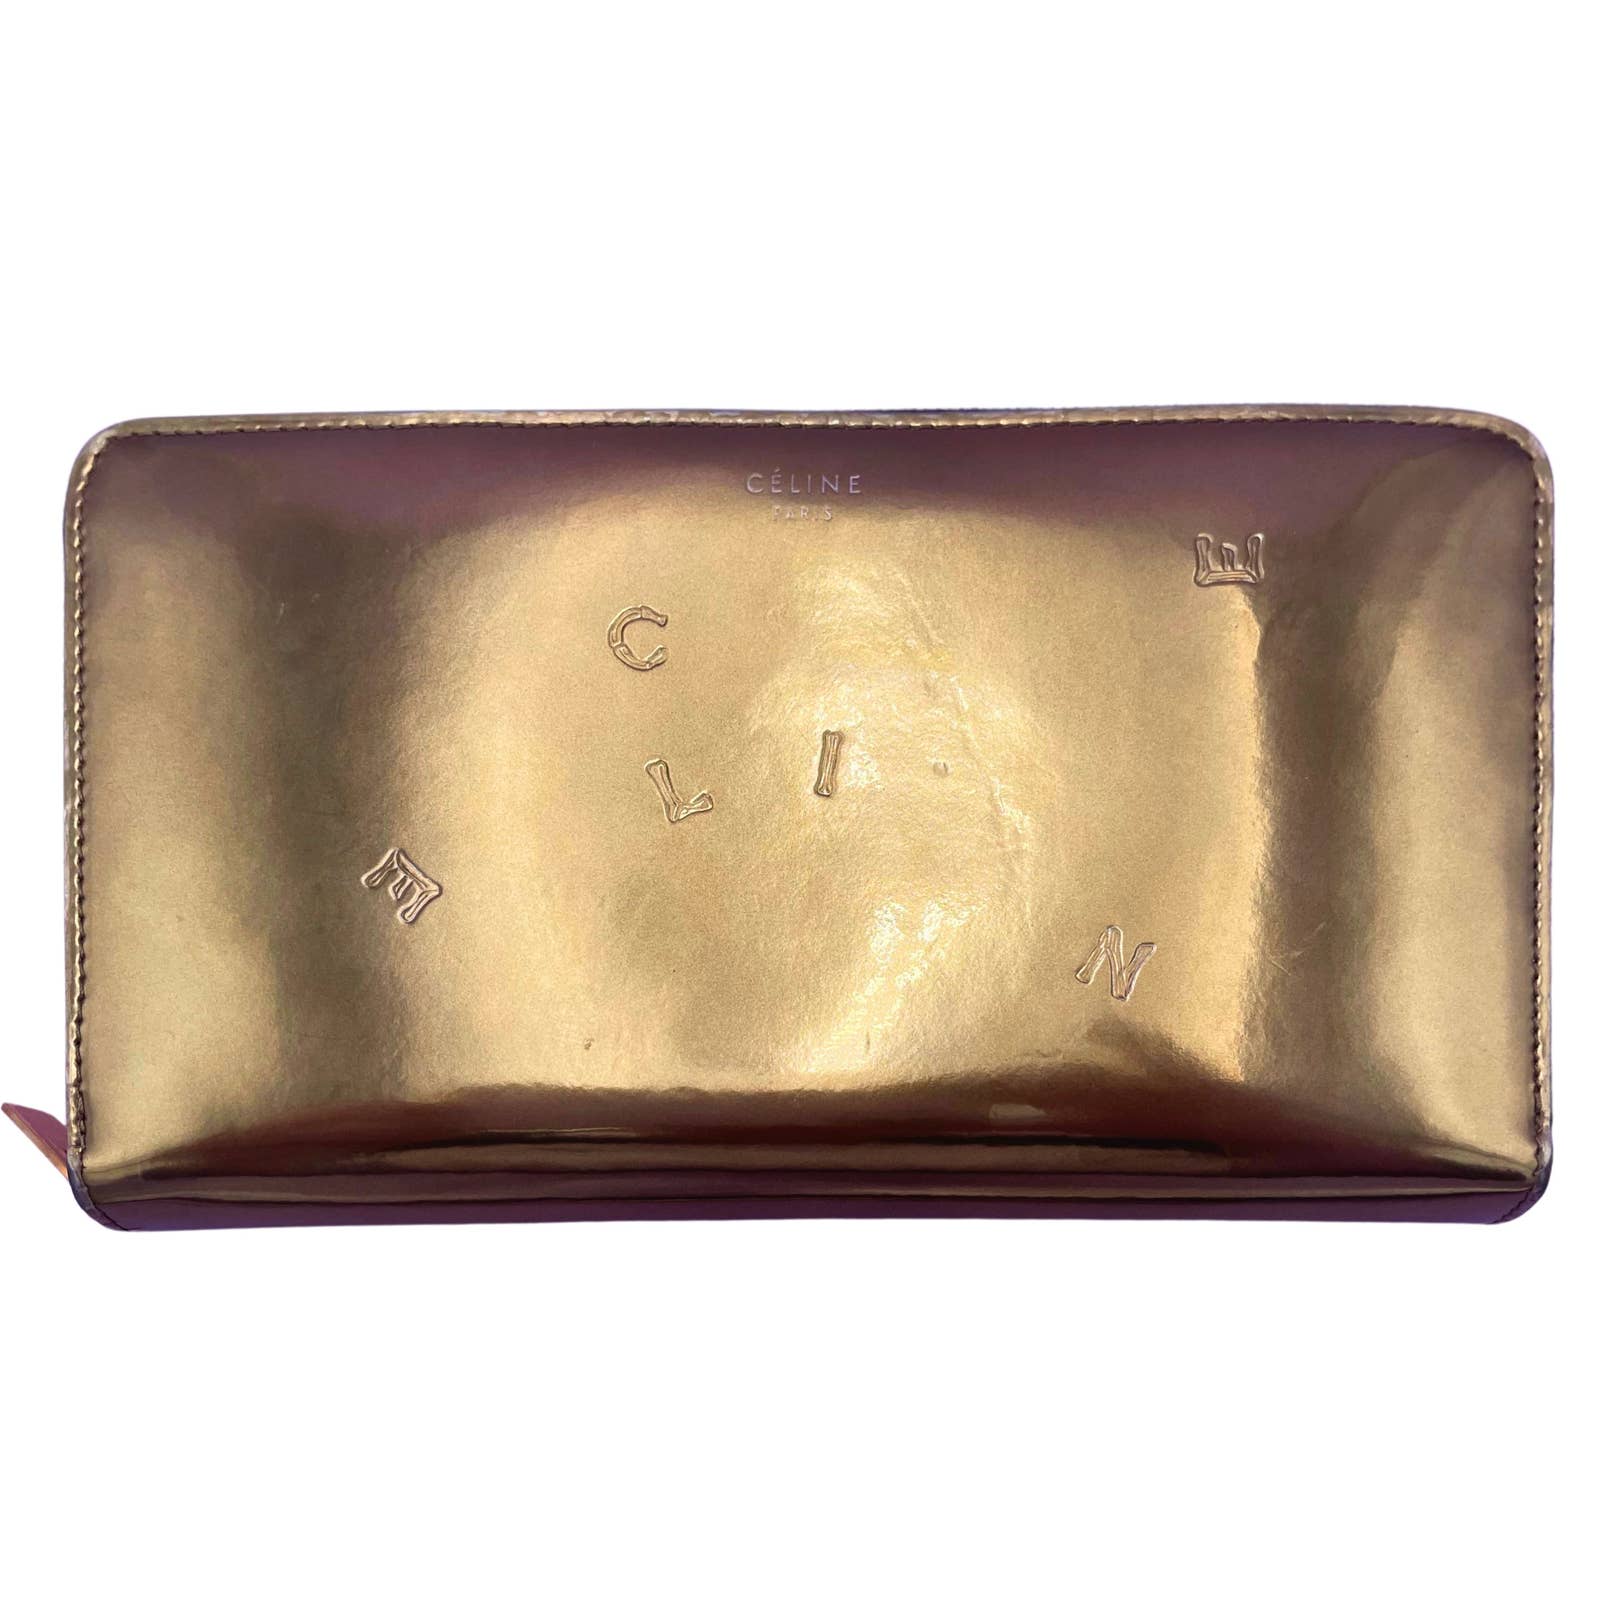 The Celine Alphabet Wallet Gold is a rectangular, metallic gold-colored accessory crafted from patent leather. "CELINE" is embossed at the center, with the letters scattered randomly across its shiny surface. It features a zipper closure to keep your essentials secure.